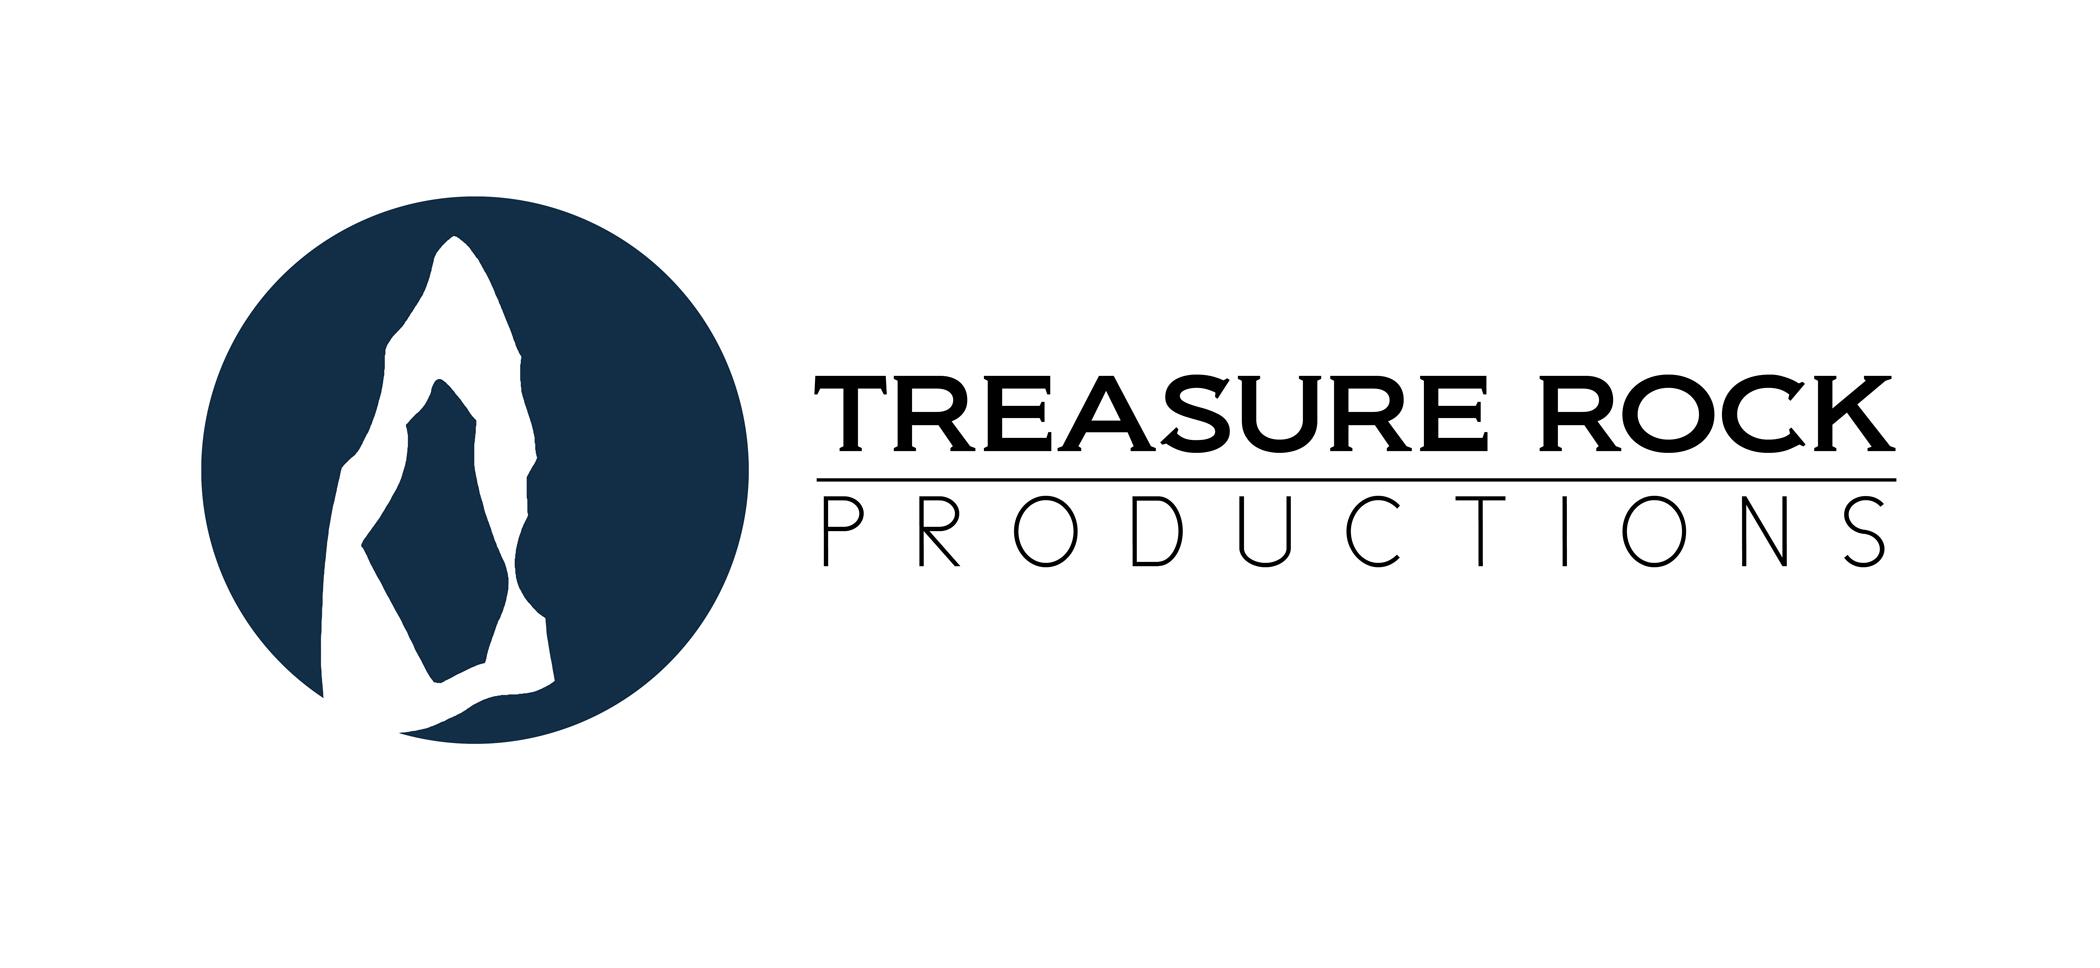 Treasure Rock Productions profile on Qualified.One